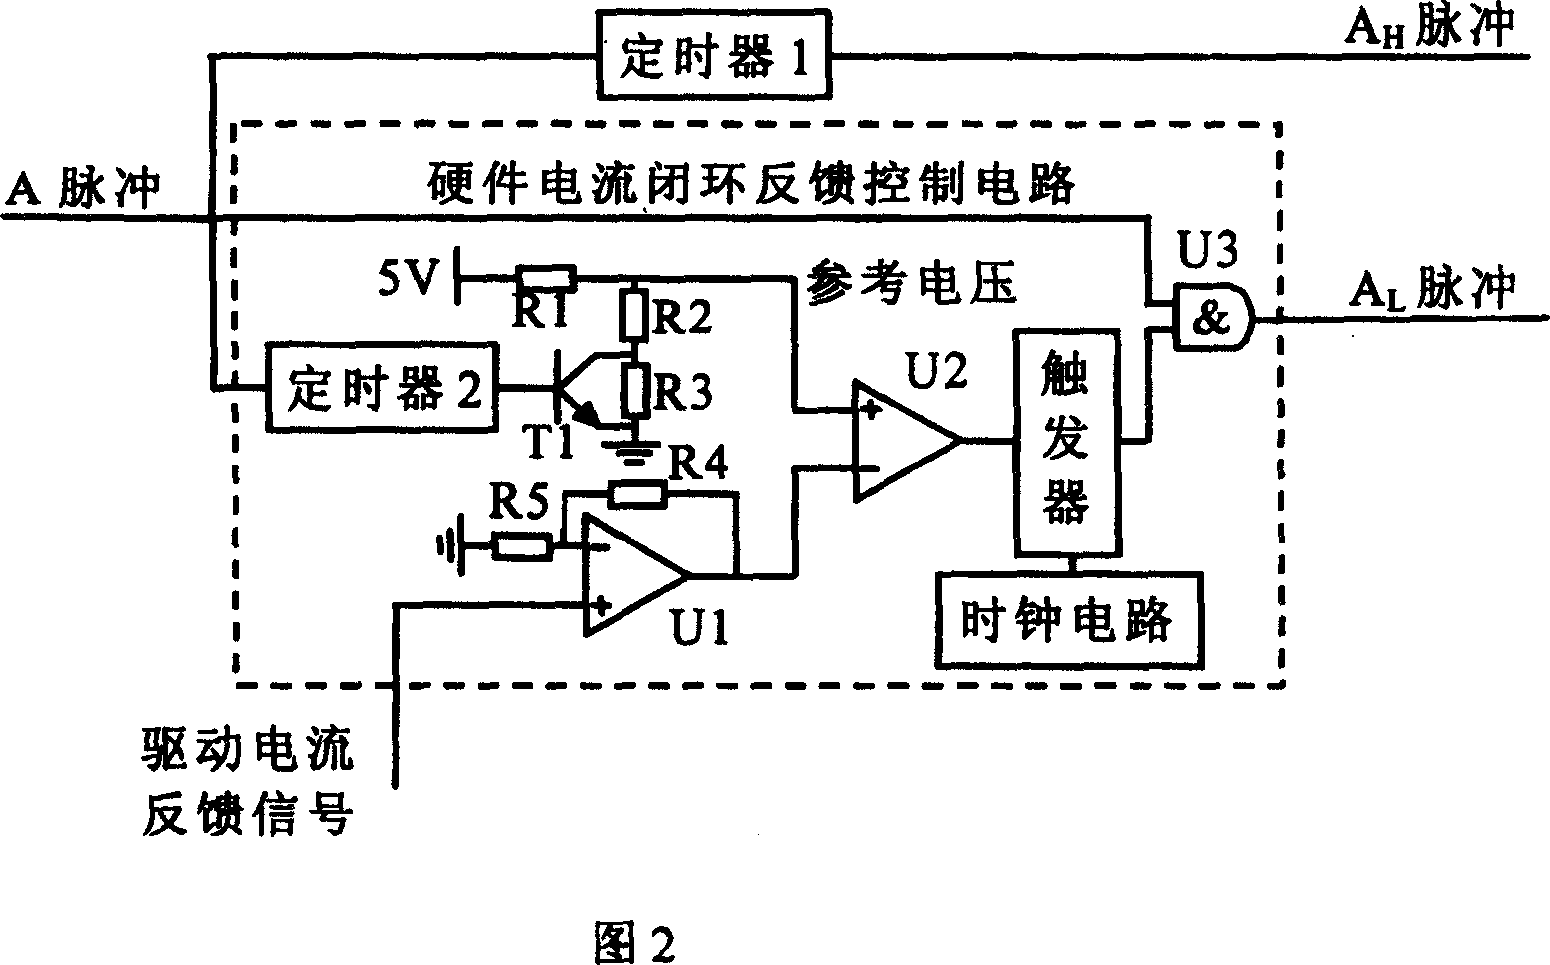 Electromagnetic valve drive circuit for engine